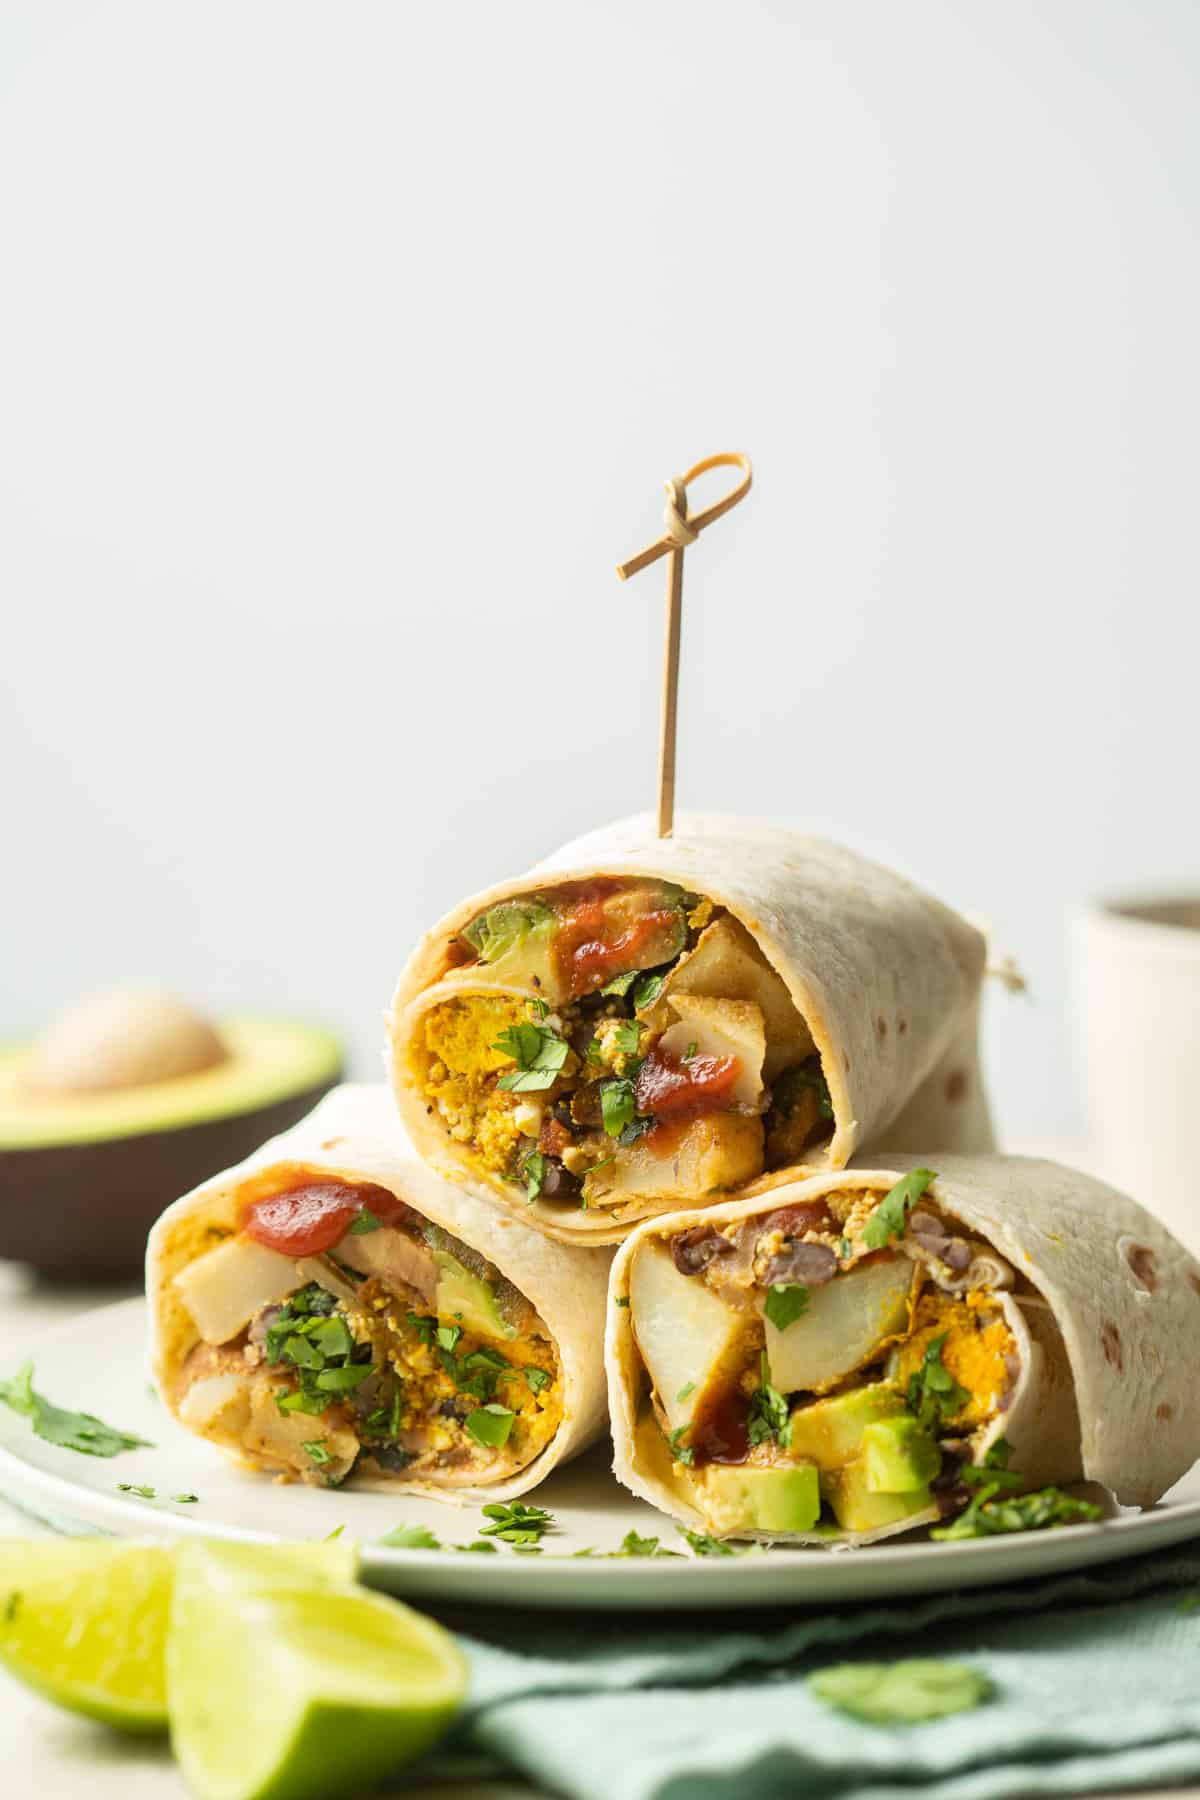 Three Vegan Breakfast Burrito halves stacked on a plate with lime wedges in the foreground.